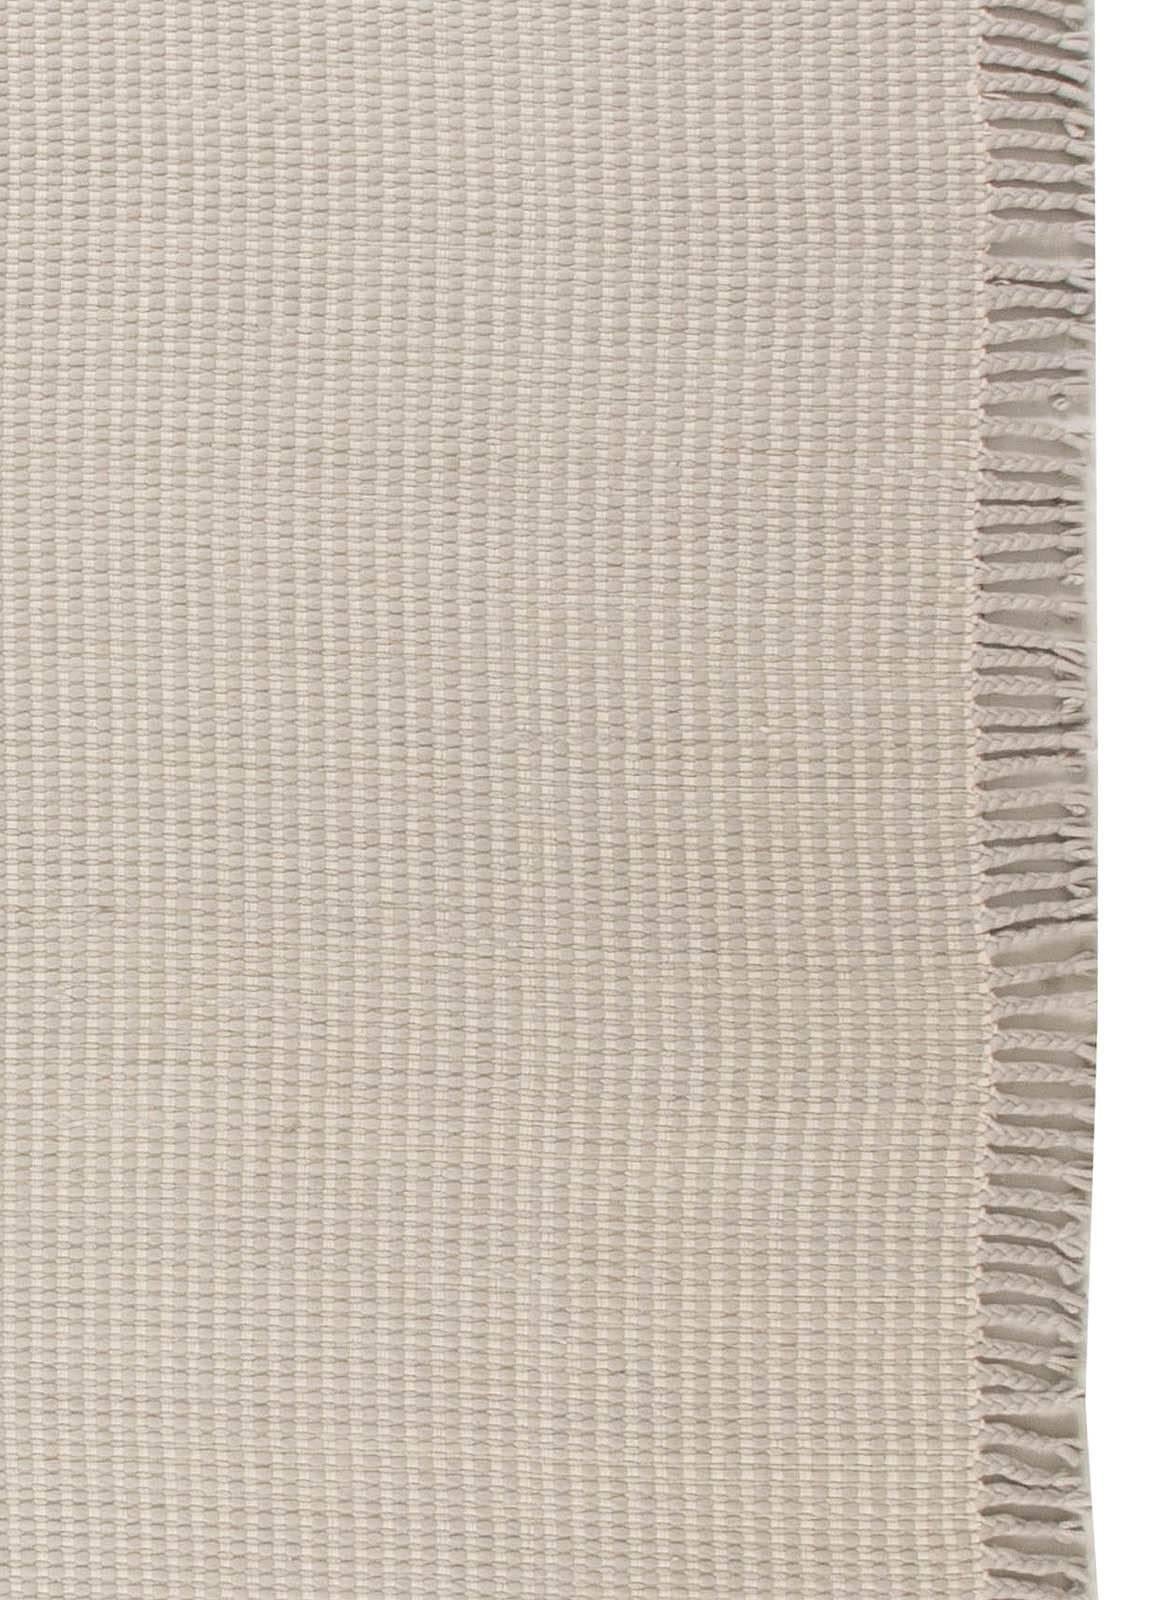 Contemporary Solid Beige and Gray Flat-Weave Wool Rug by Doris Leslie Blau For Sale 1